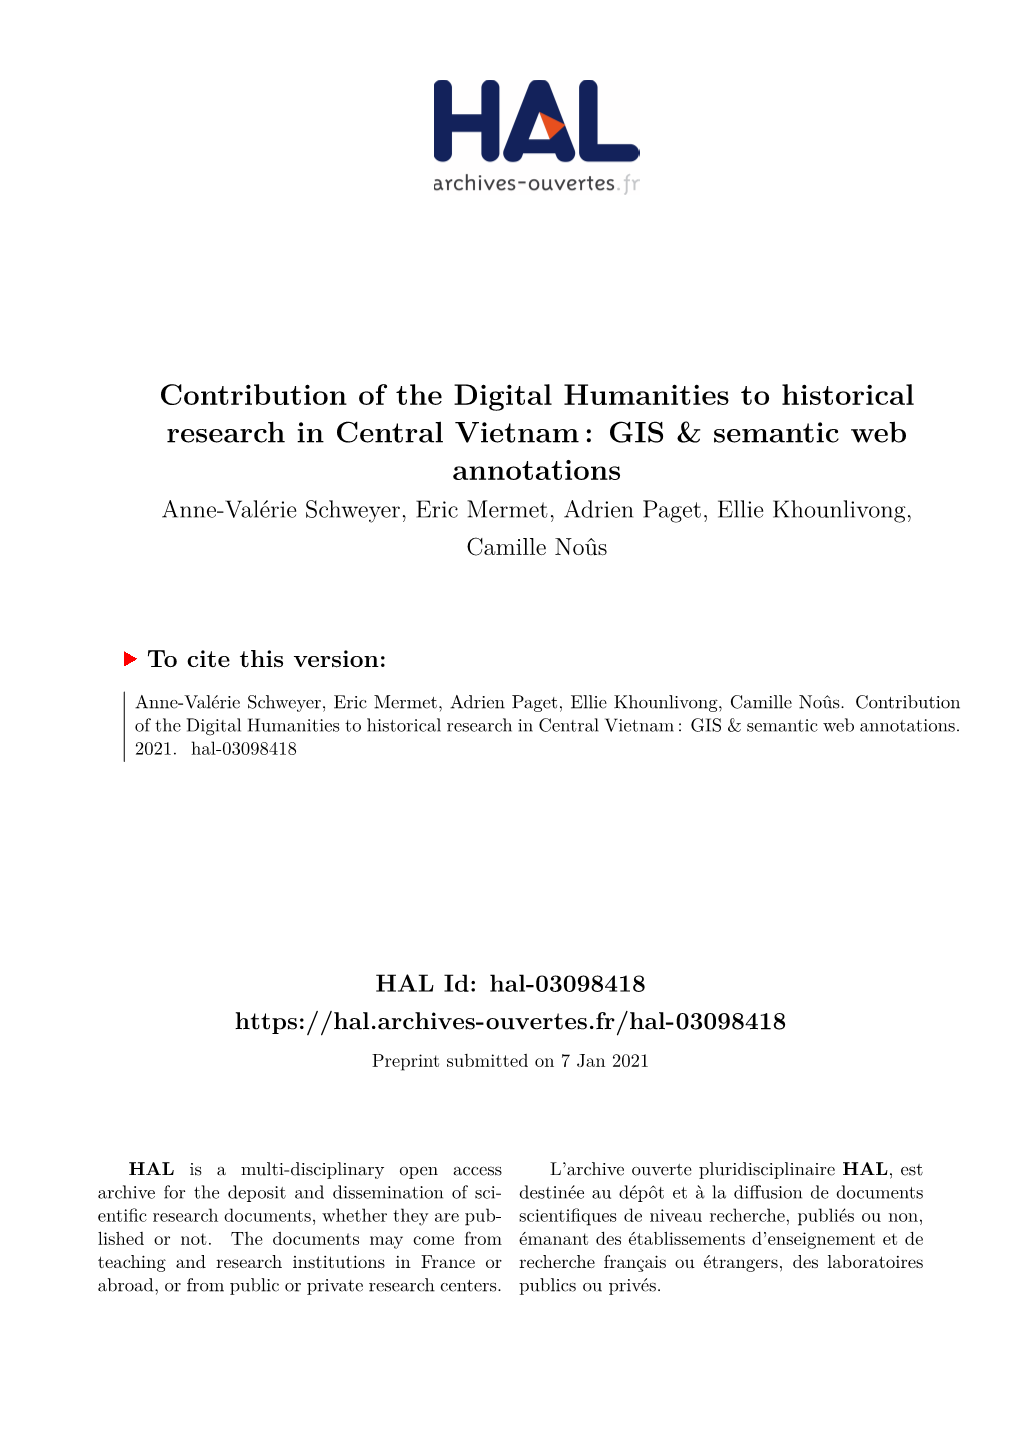 Contribution of the Digital Humanities to Historical